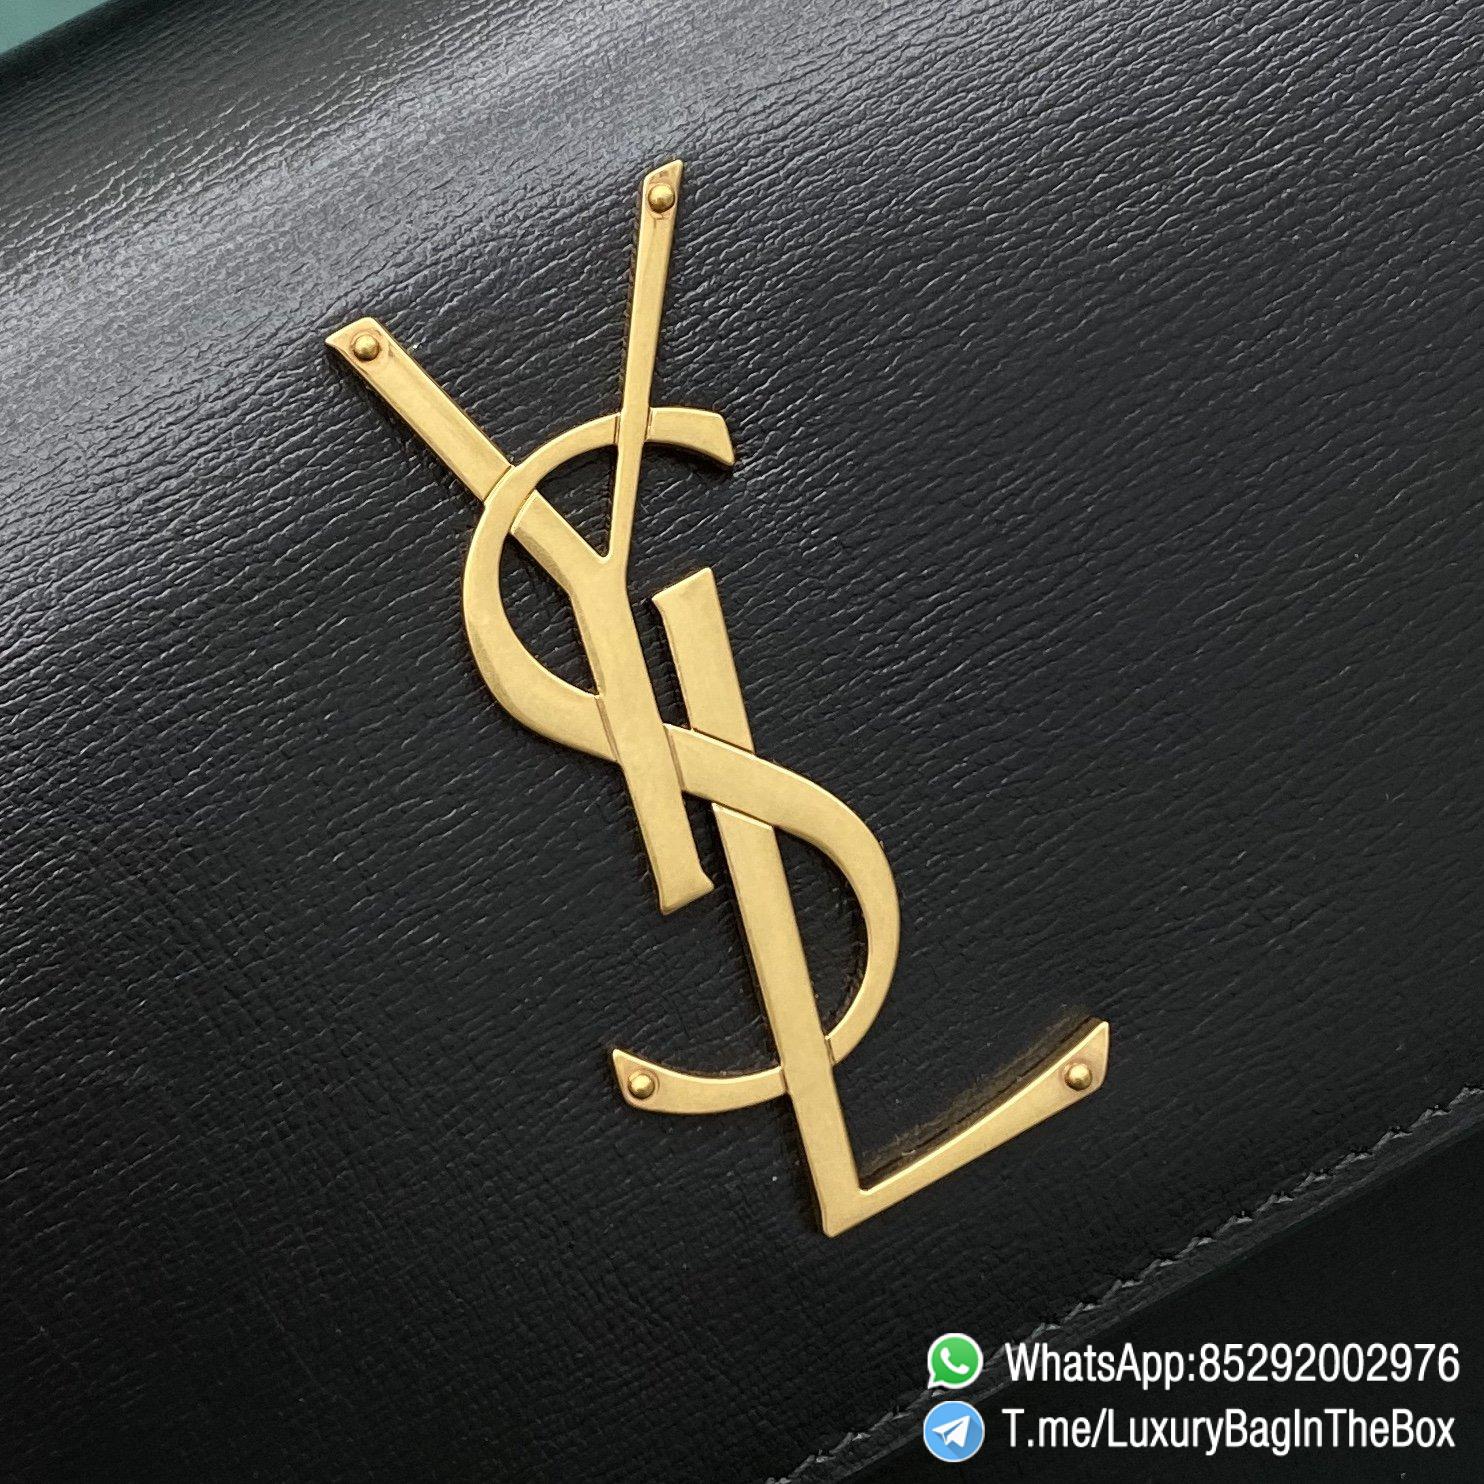 YSL MEDIUM SUNSET SATCHEL IN BLACK SMOOTH LEATHER SATCHEL FRONT FLAP TOP HANDLE ADJUSTABLE AND DETACHABLE LEATHER AND CHAIN STRAP BRONZE METAL YSL INITIALS SKU 634723D420W1000 07